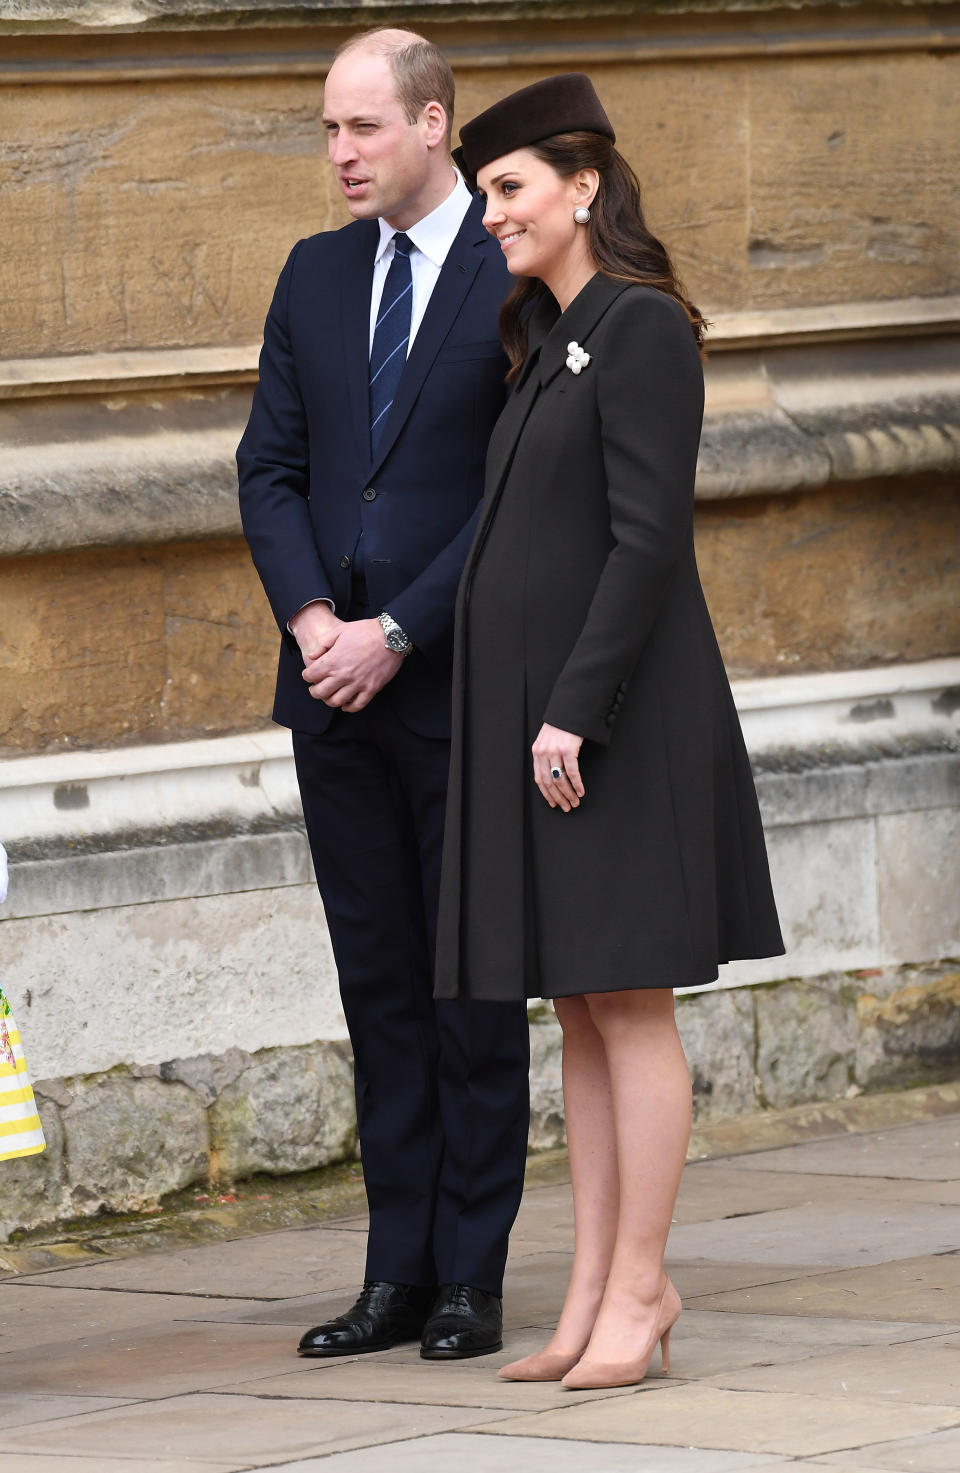 The duchess wore a black coat and matching hat. (Photo: Karwai Tang via Getty Images)